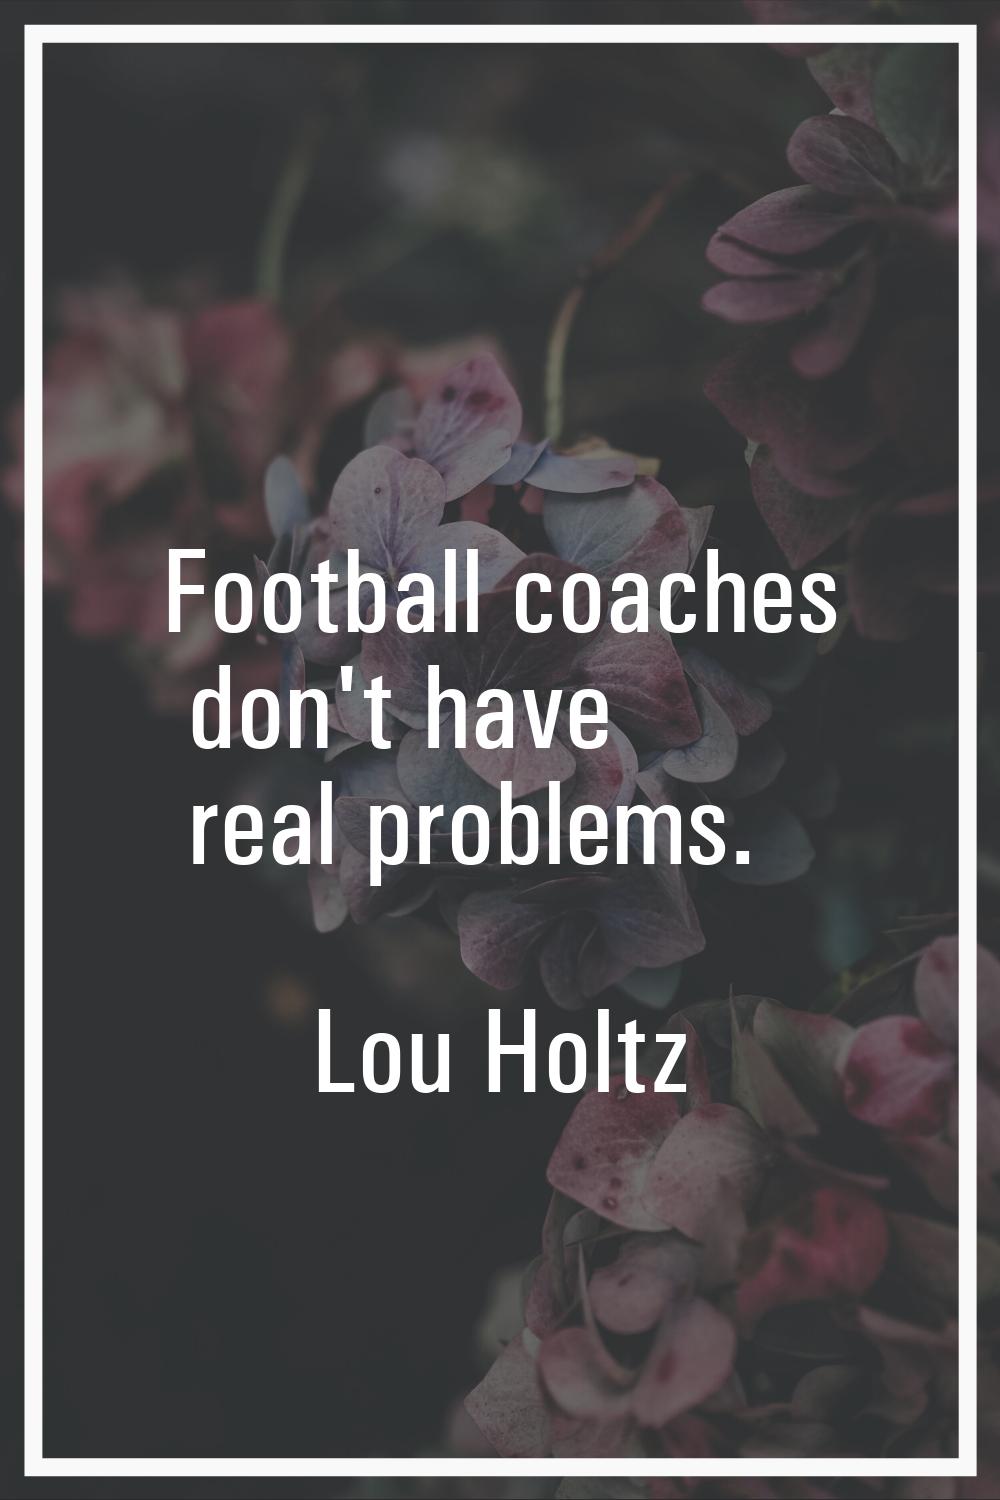 Football coaches don't have real problems.